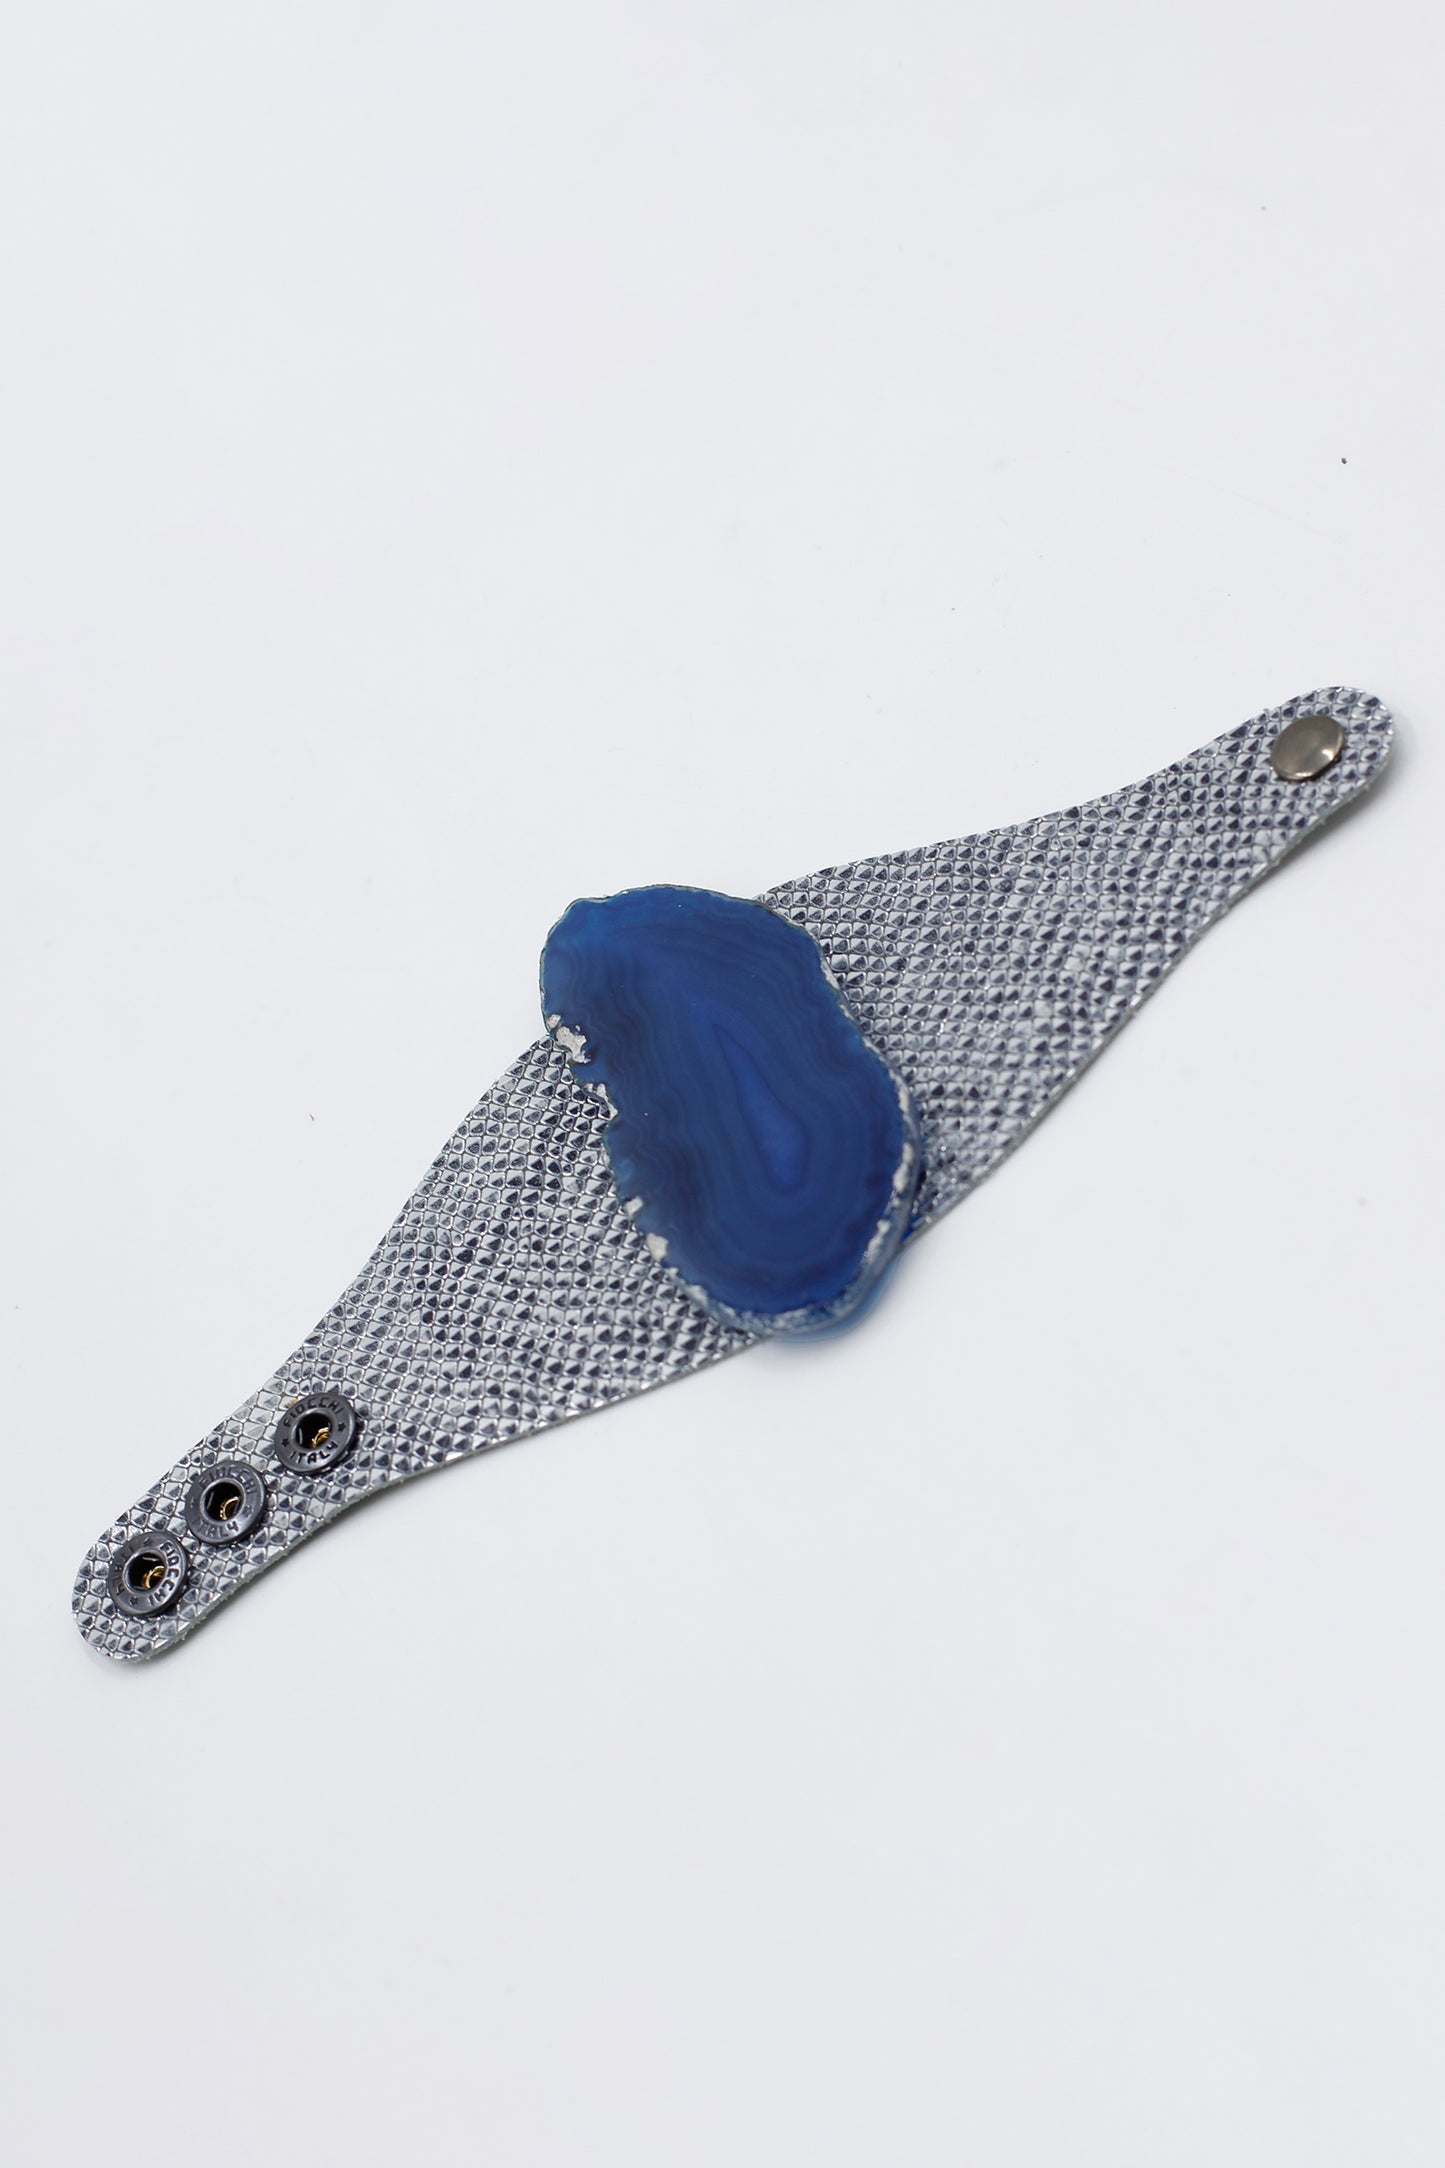 Silver Scale Bracelet with Blue Agate